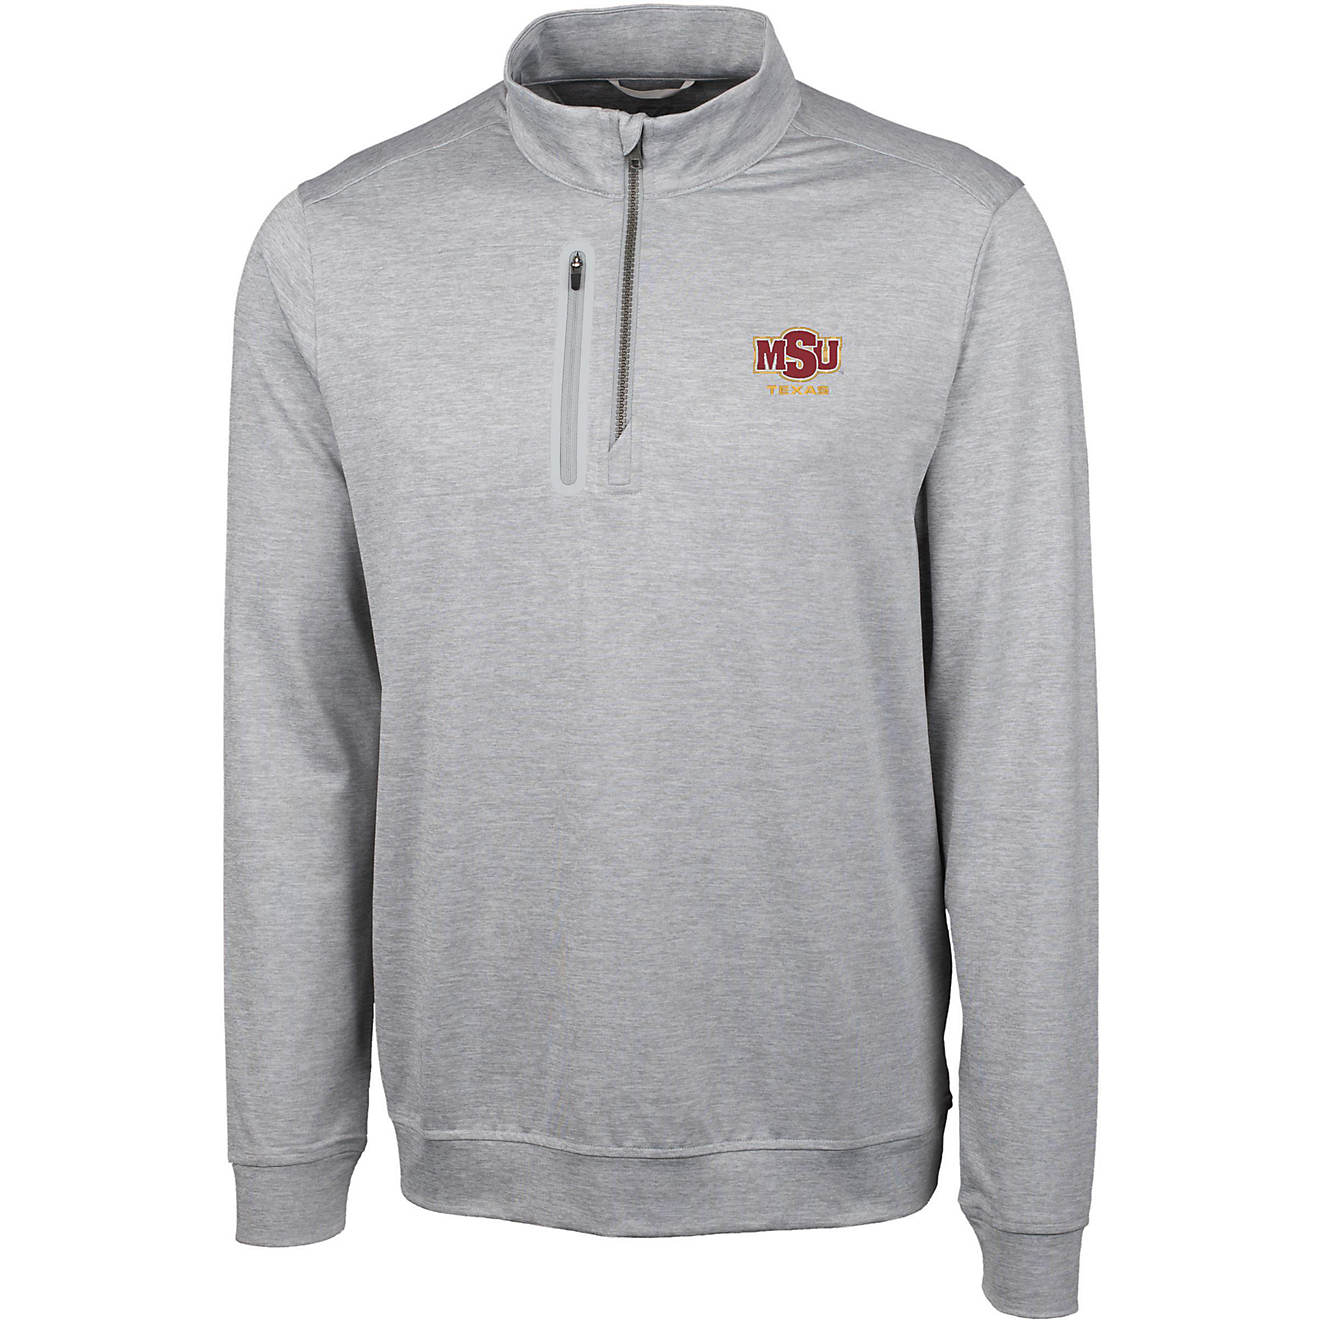 Cutter & Buck Men's Midwestern State University Stealth Half Zip                                                                 - view number 1